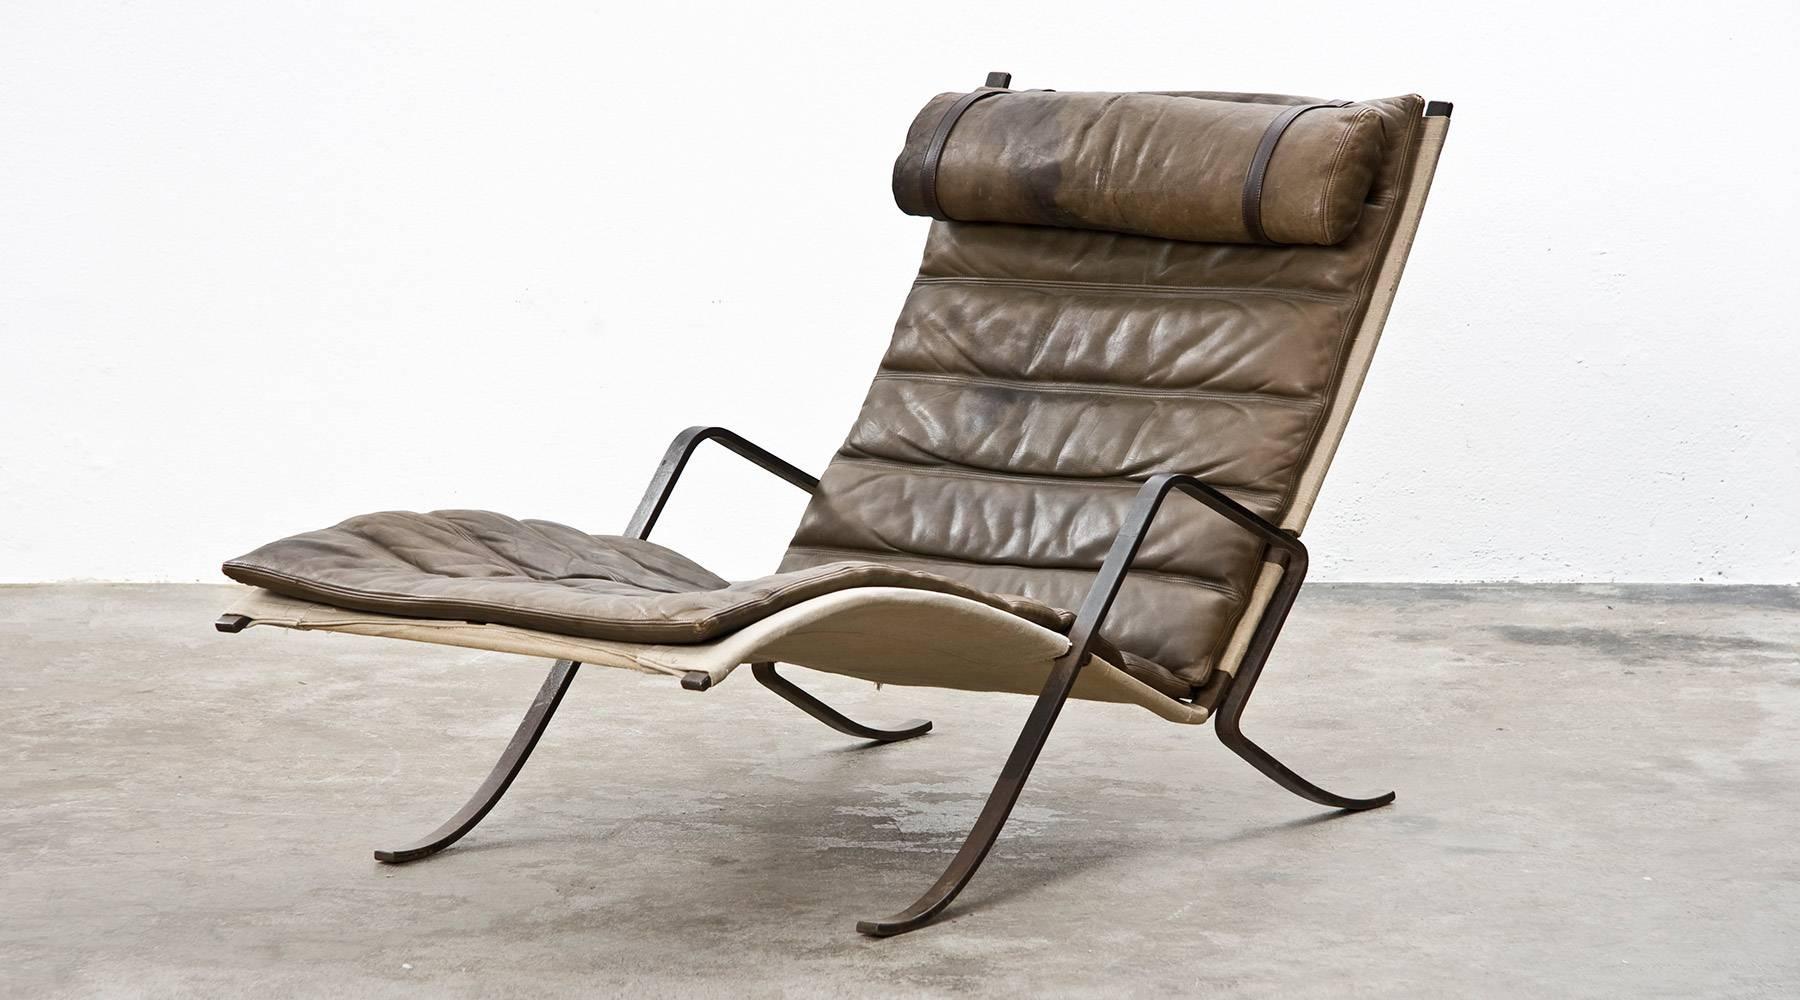 This model is a forerunner of the Grasshopper Lounge Chair designed by Preben Fabricius and Jørgen Kastholm in aniline leather which has a perfect looking patina and the base in flat steel is still in very good original condition. The comfortability